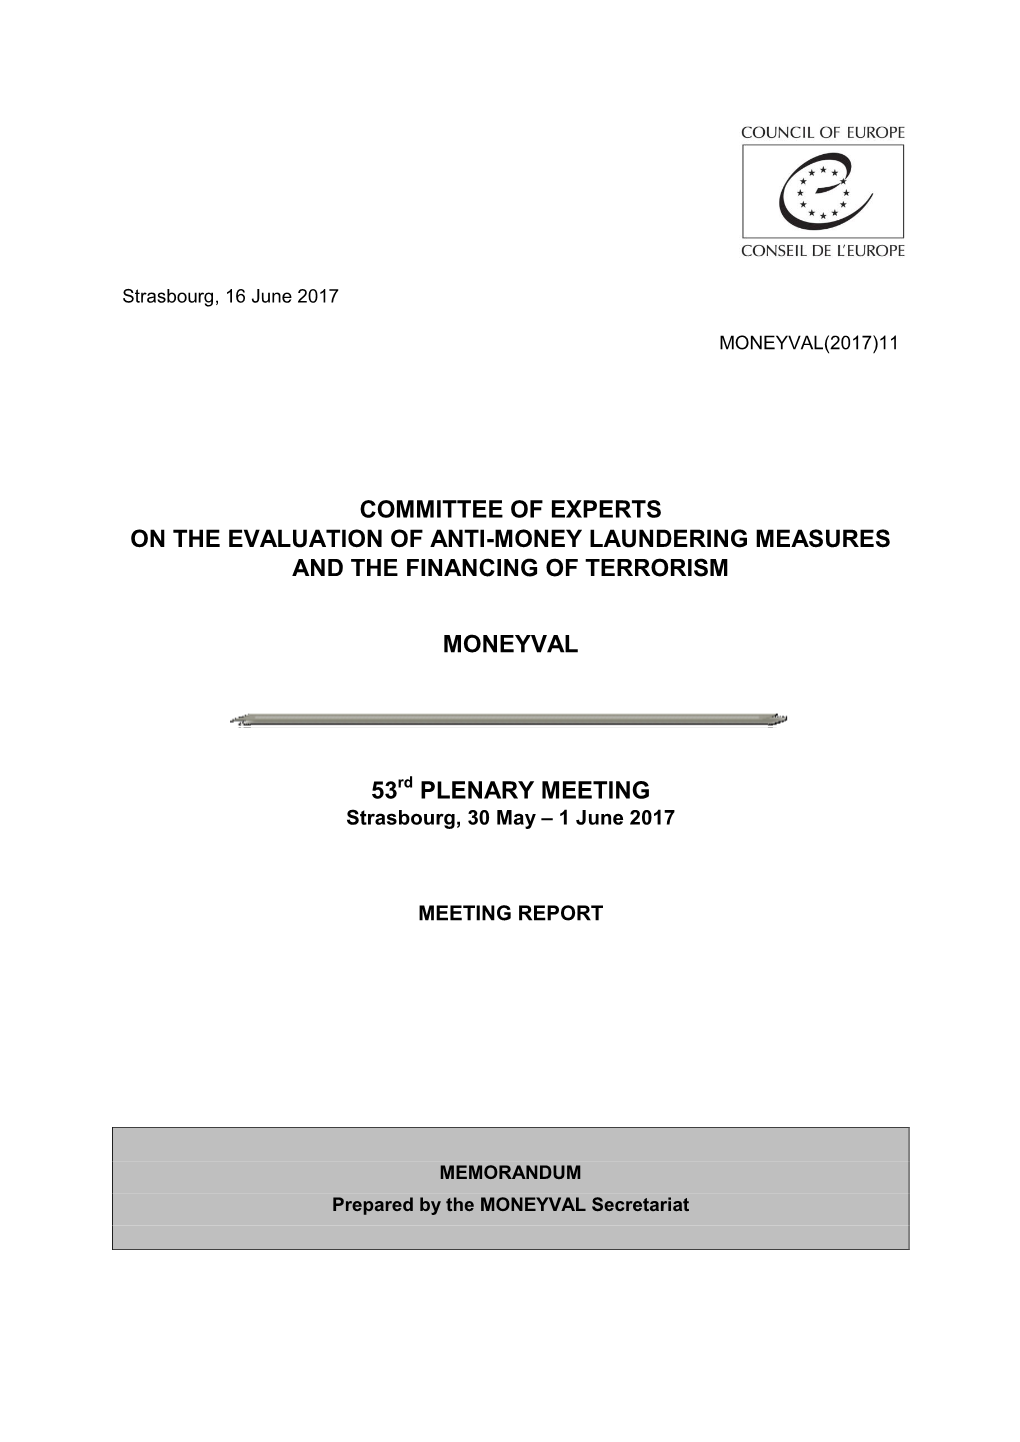 Committee of Experts on the Evaluation of Anti-Money Laundering Measures and the Financing of Terrorism